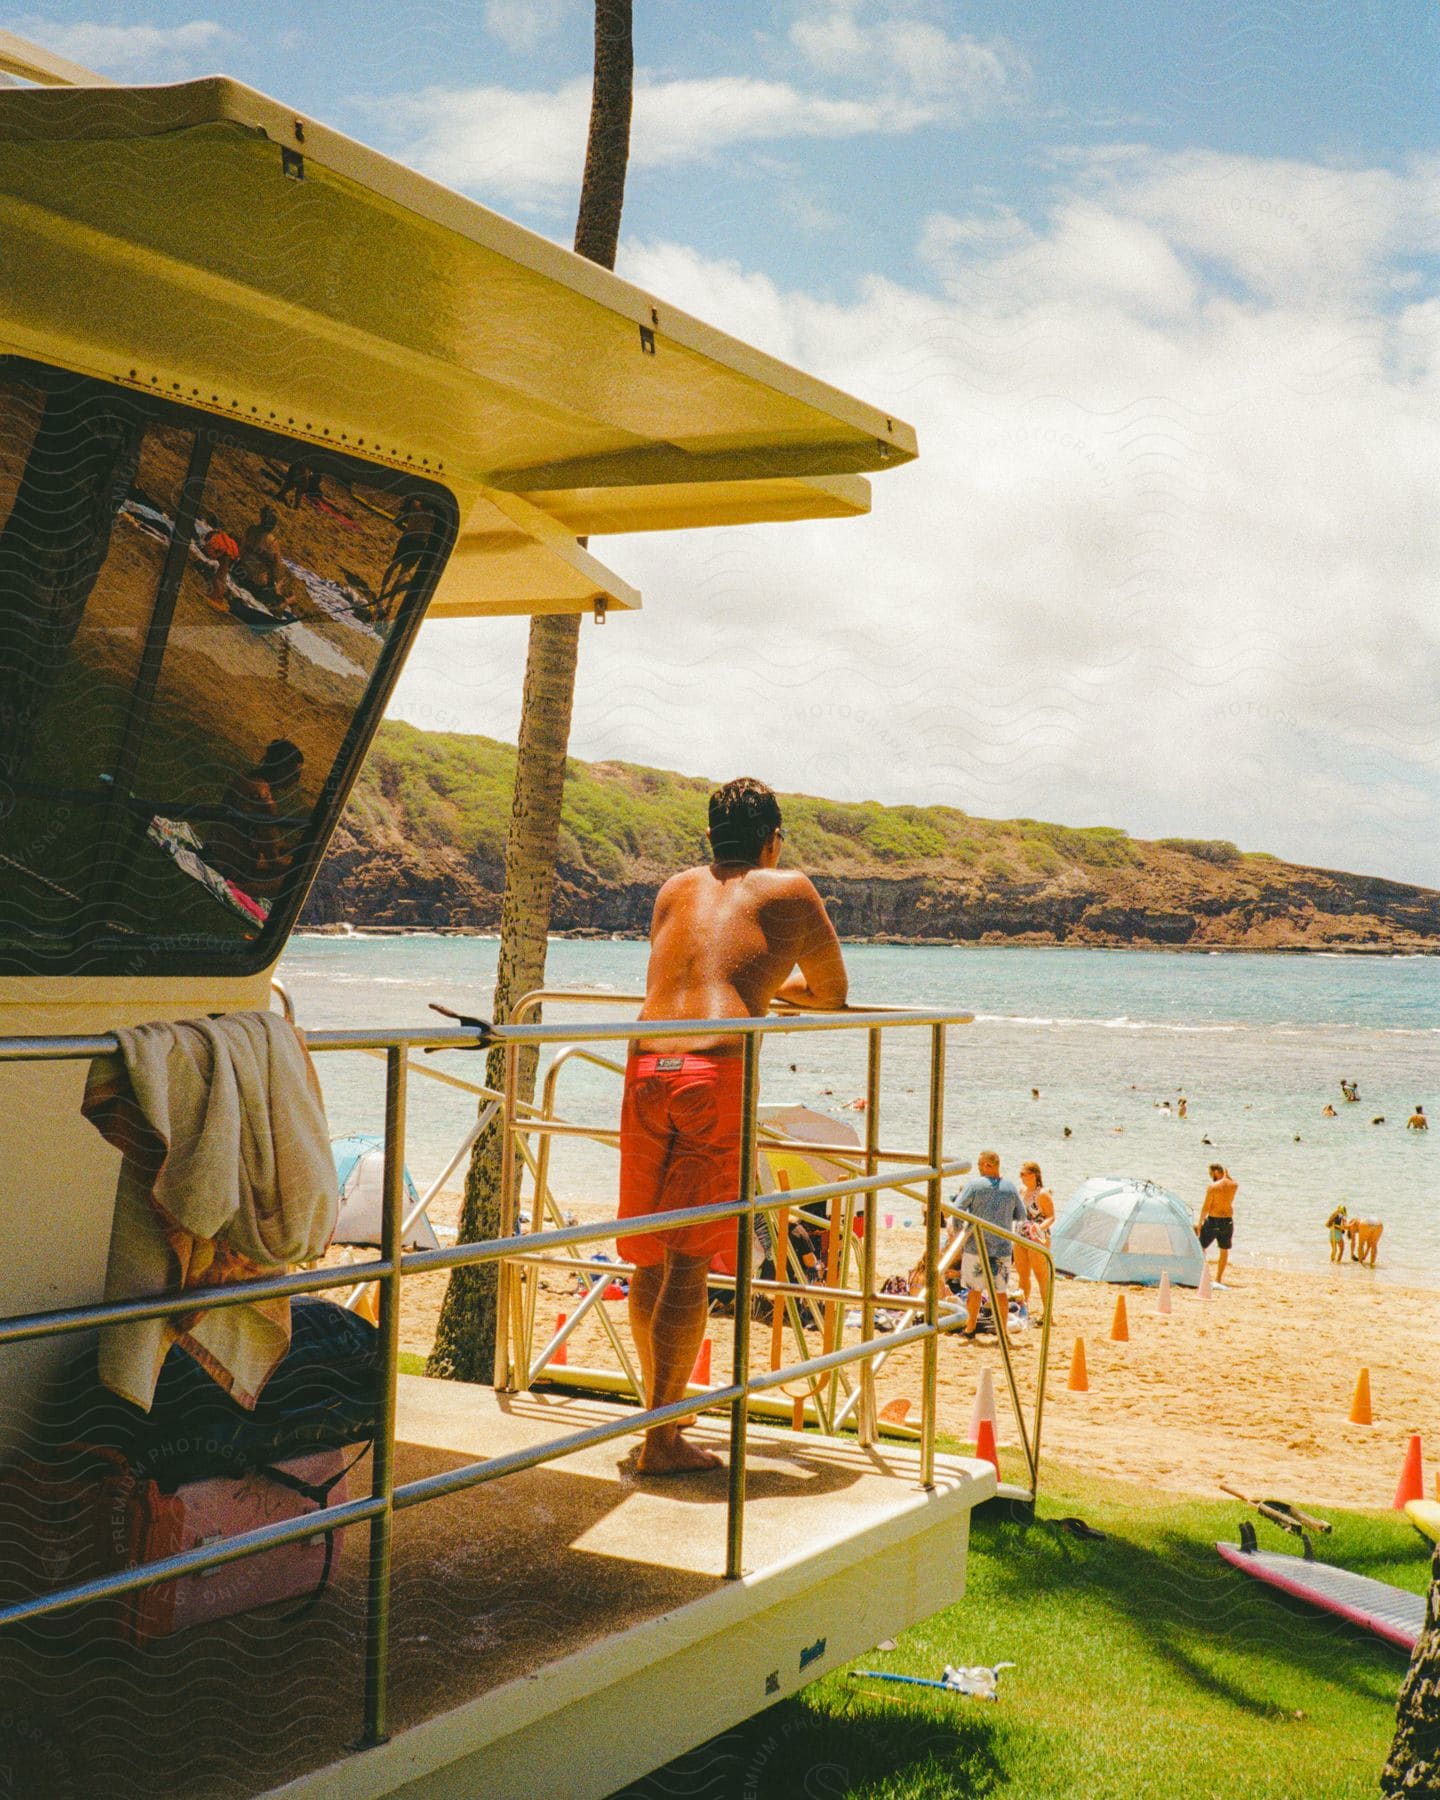 A man standing in a beach house observing people playing on the beach during the day